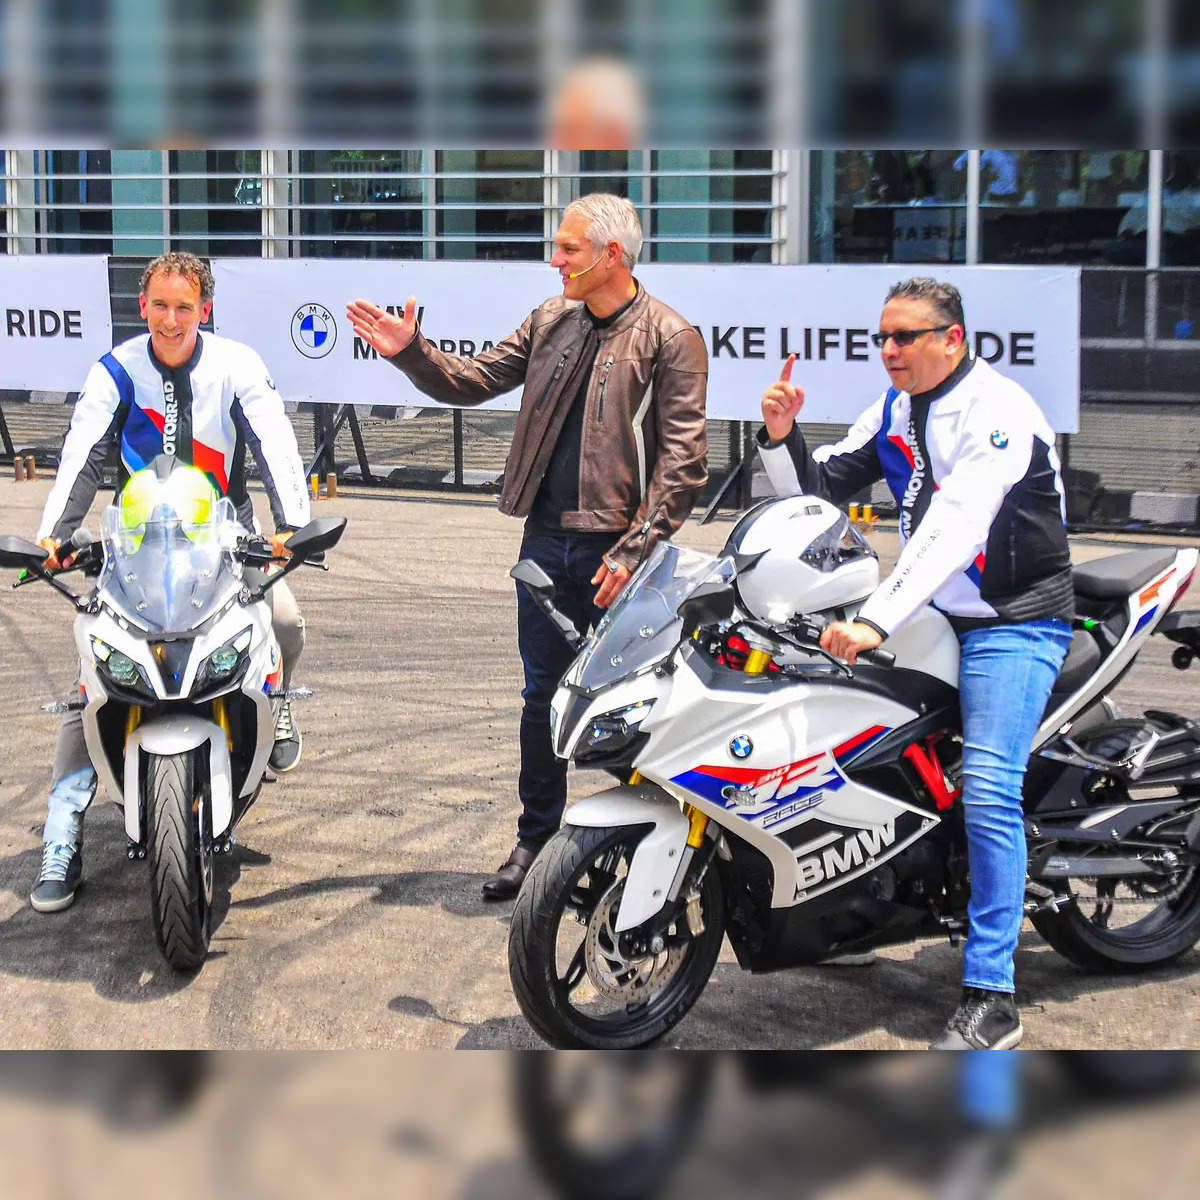 bmw motorrad: India emerges as fastest growing market for BMW